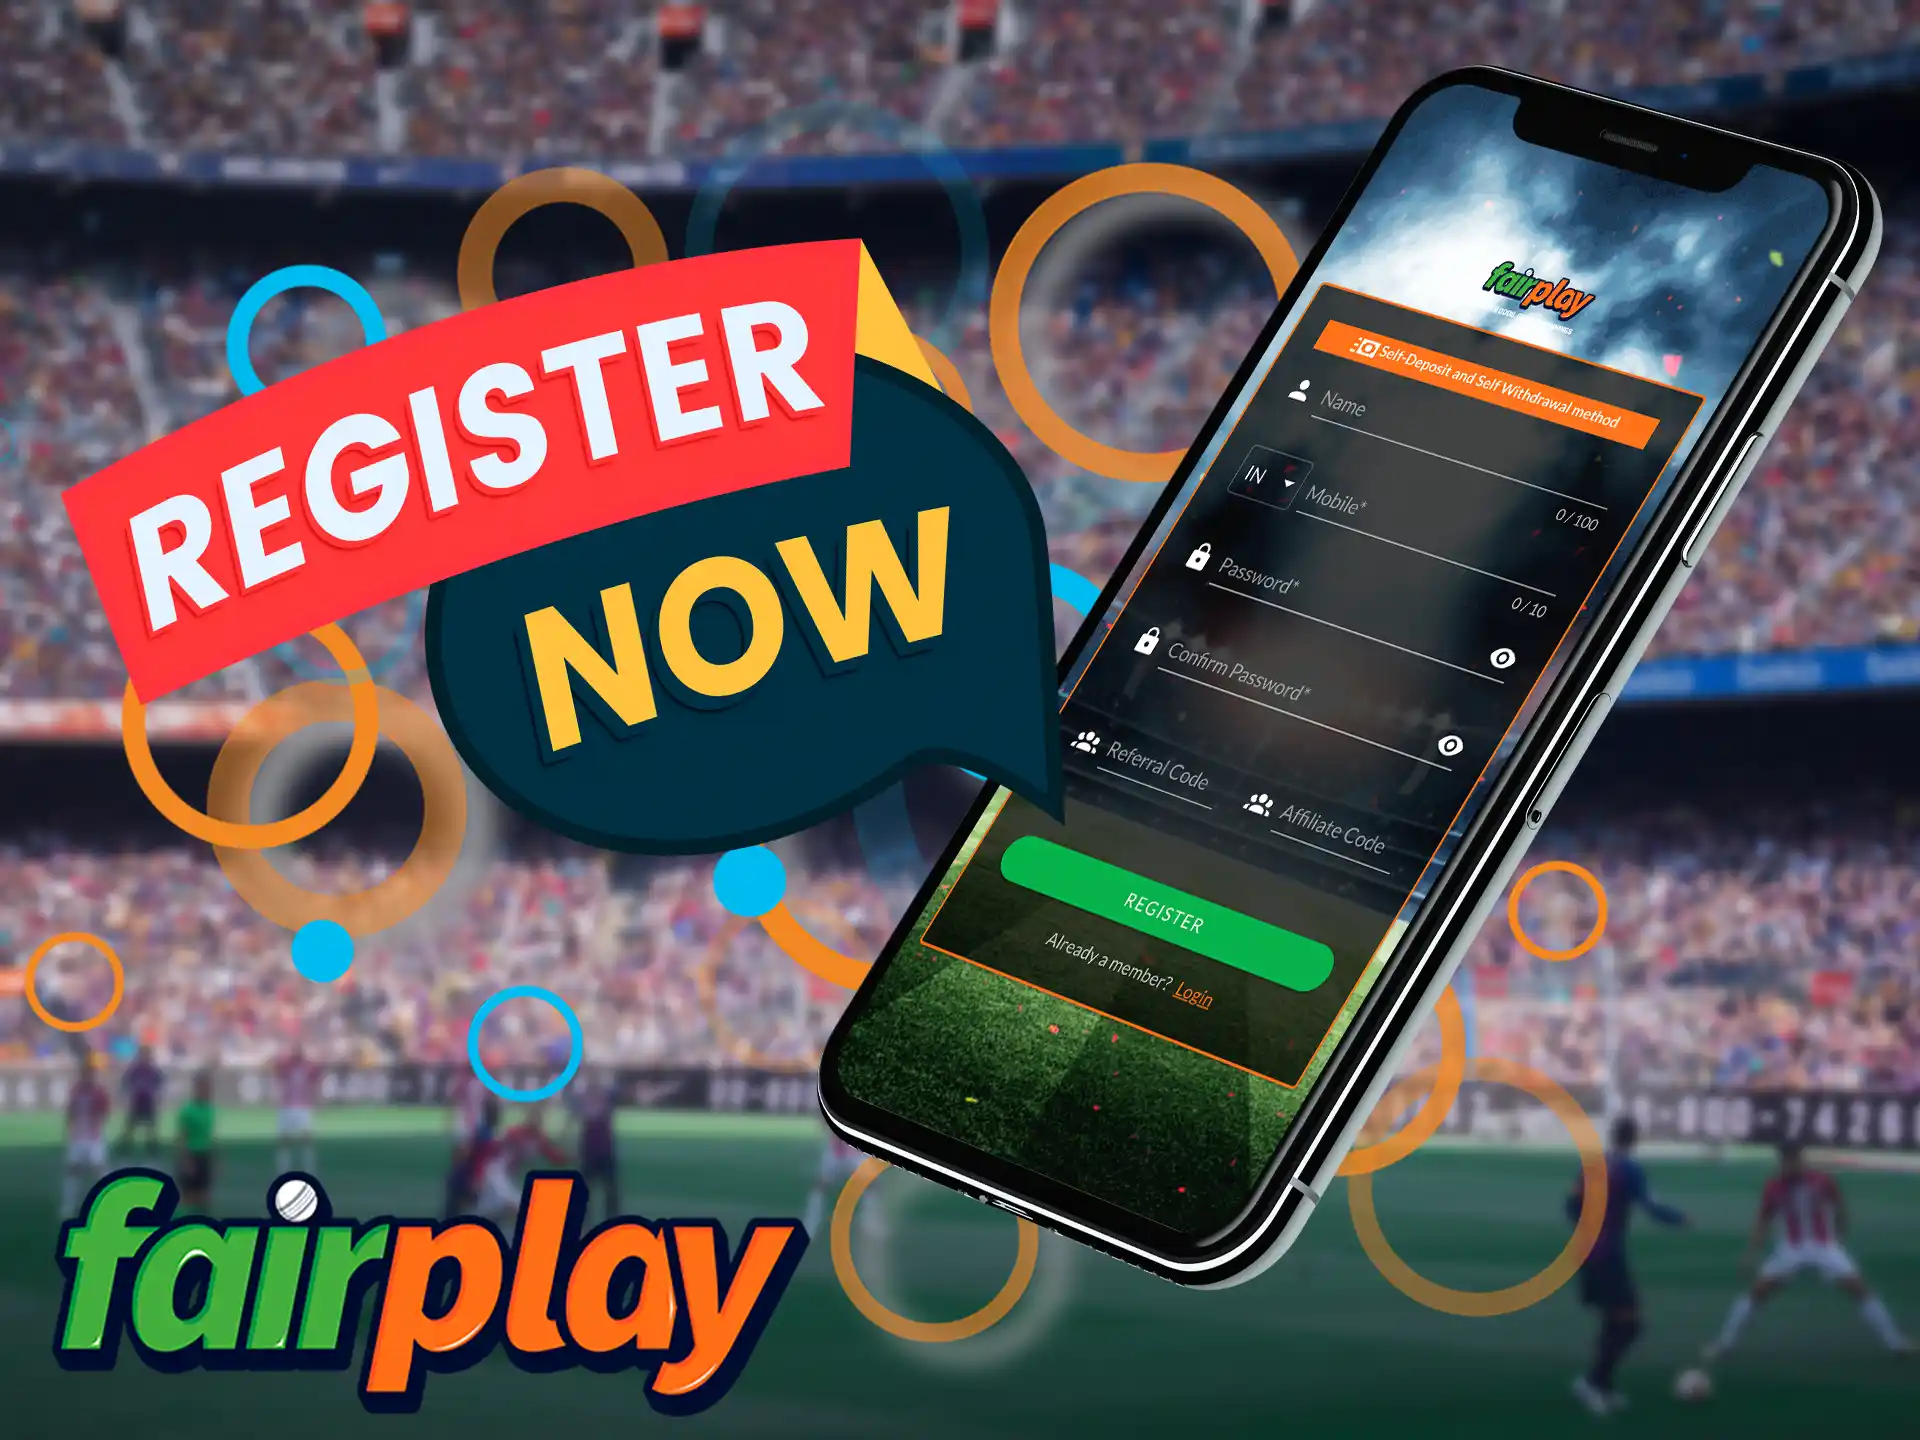 In order to fully enjoy betting at Fairplay you need to create an account to speed up the process follow our guide.